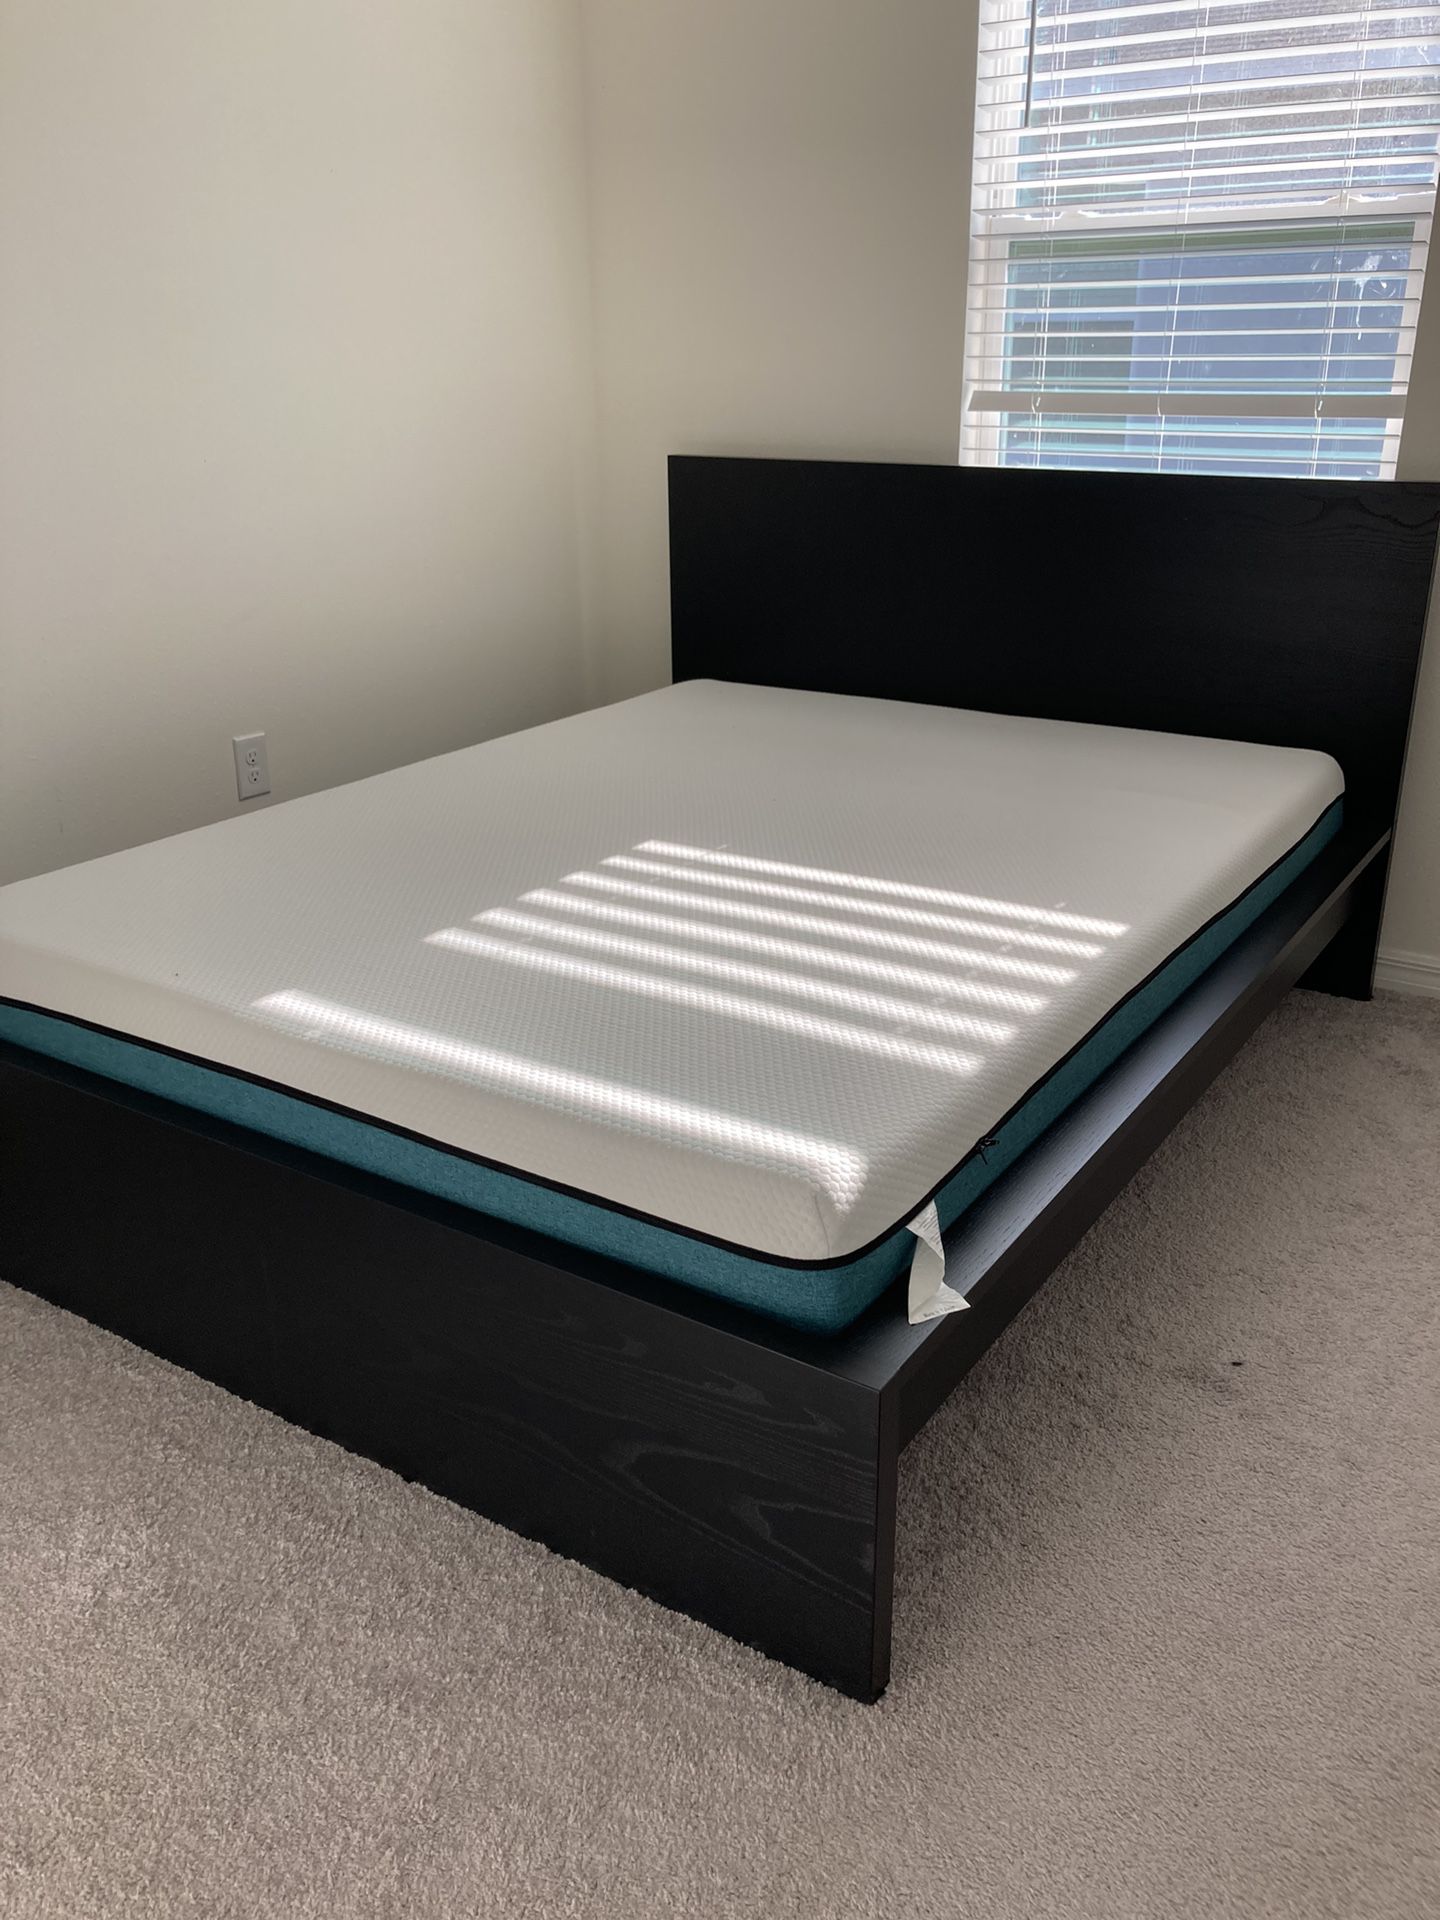 Bed Frame With mattress - Moving Out Sale